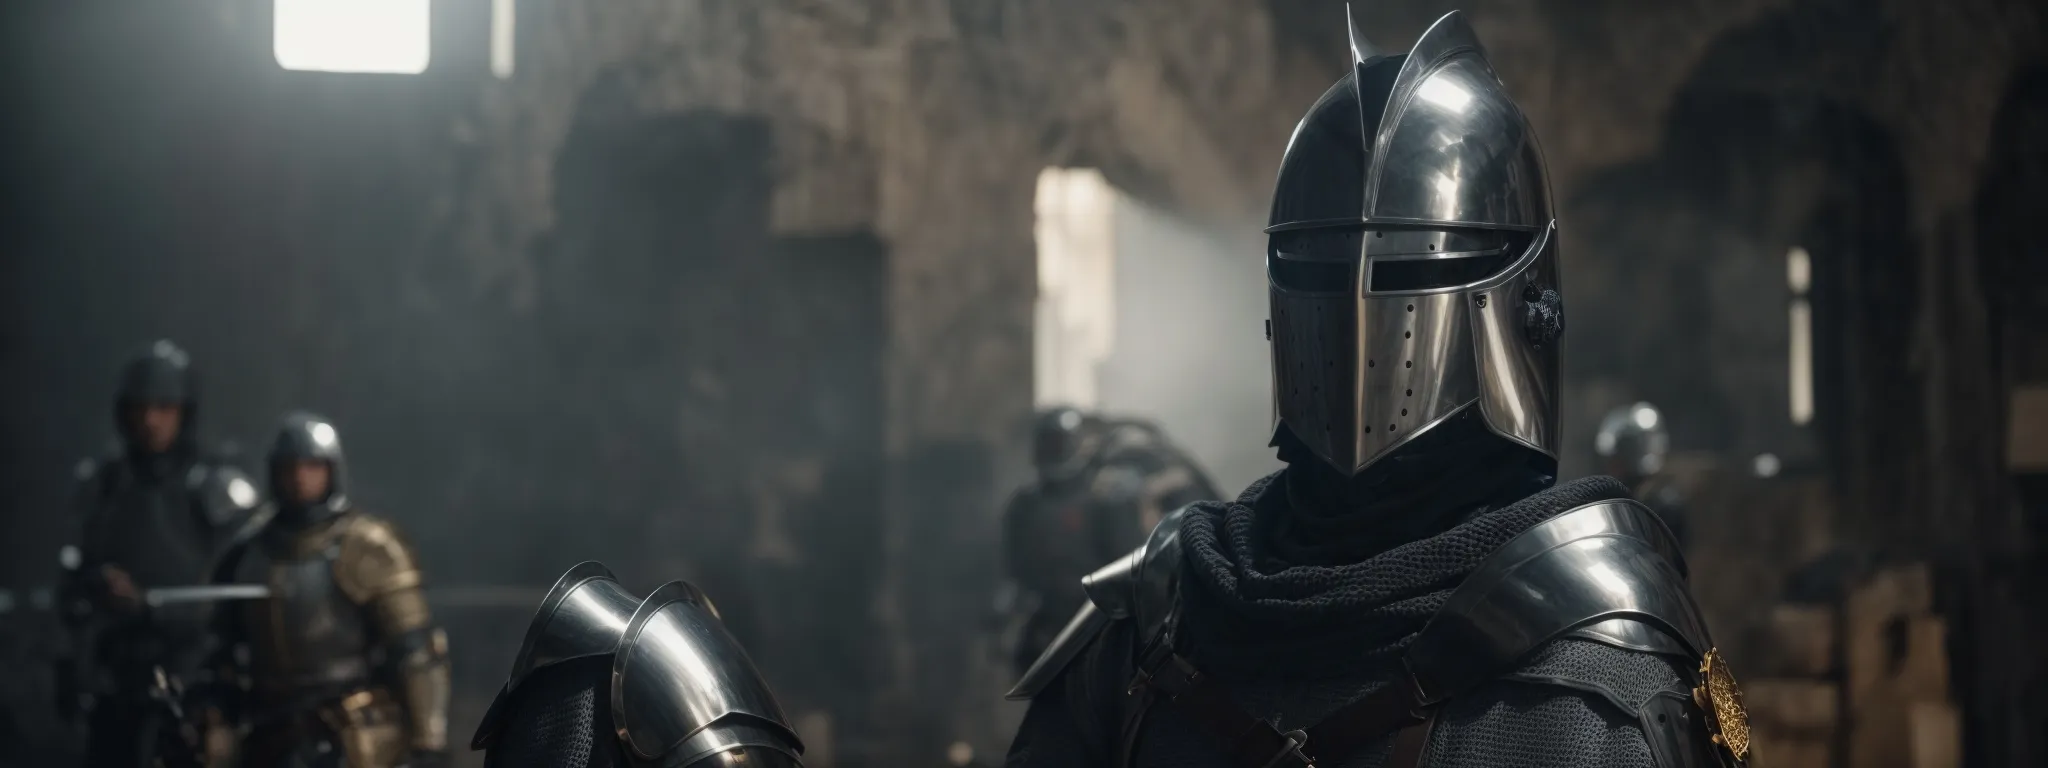 a knight donning a gleaming suit of armor stands ready to fend off invisible digital threats.